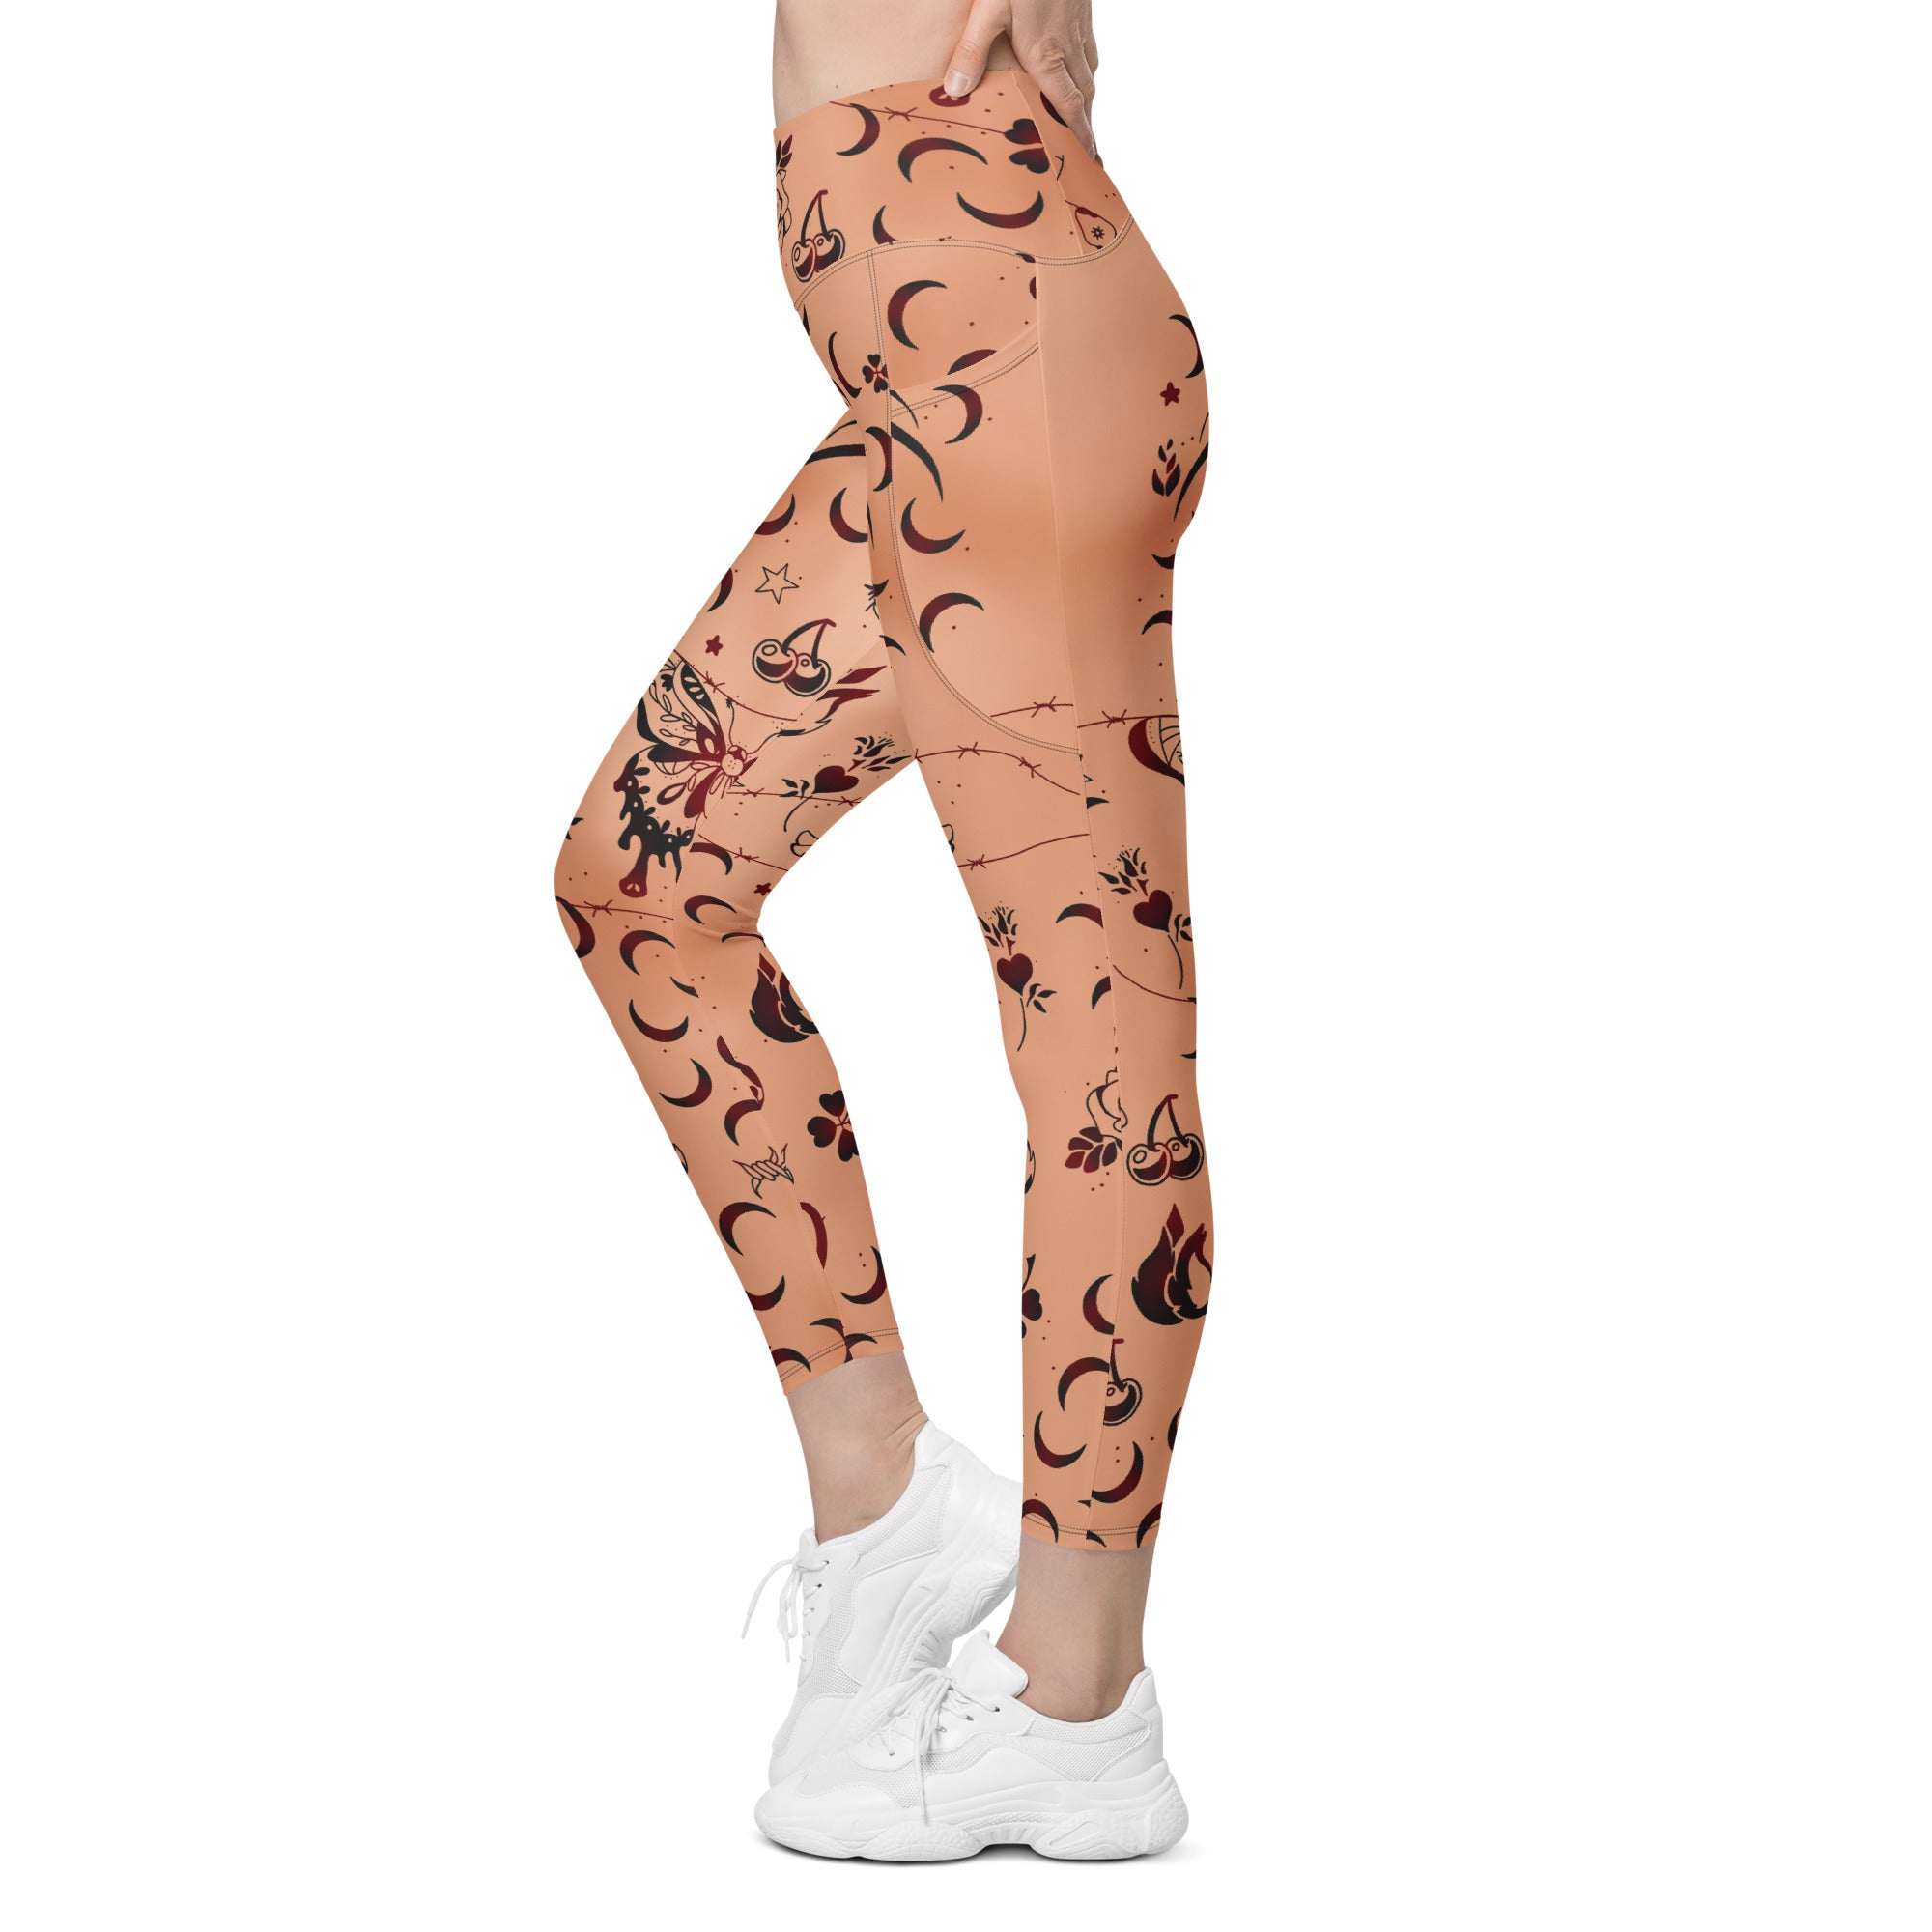 Tattoo Inspired Leggings With Pockets